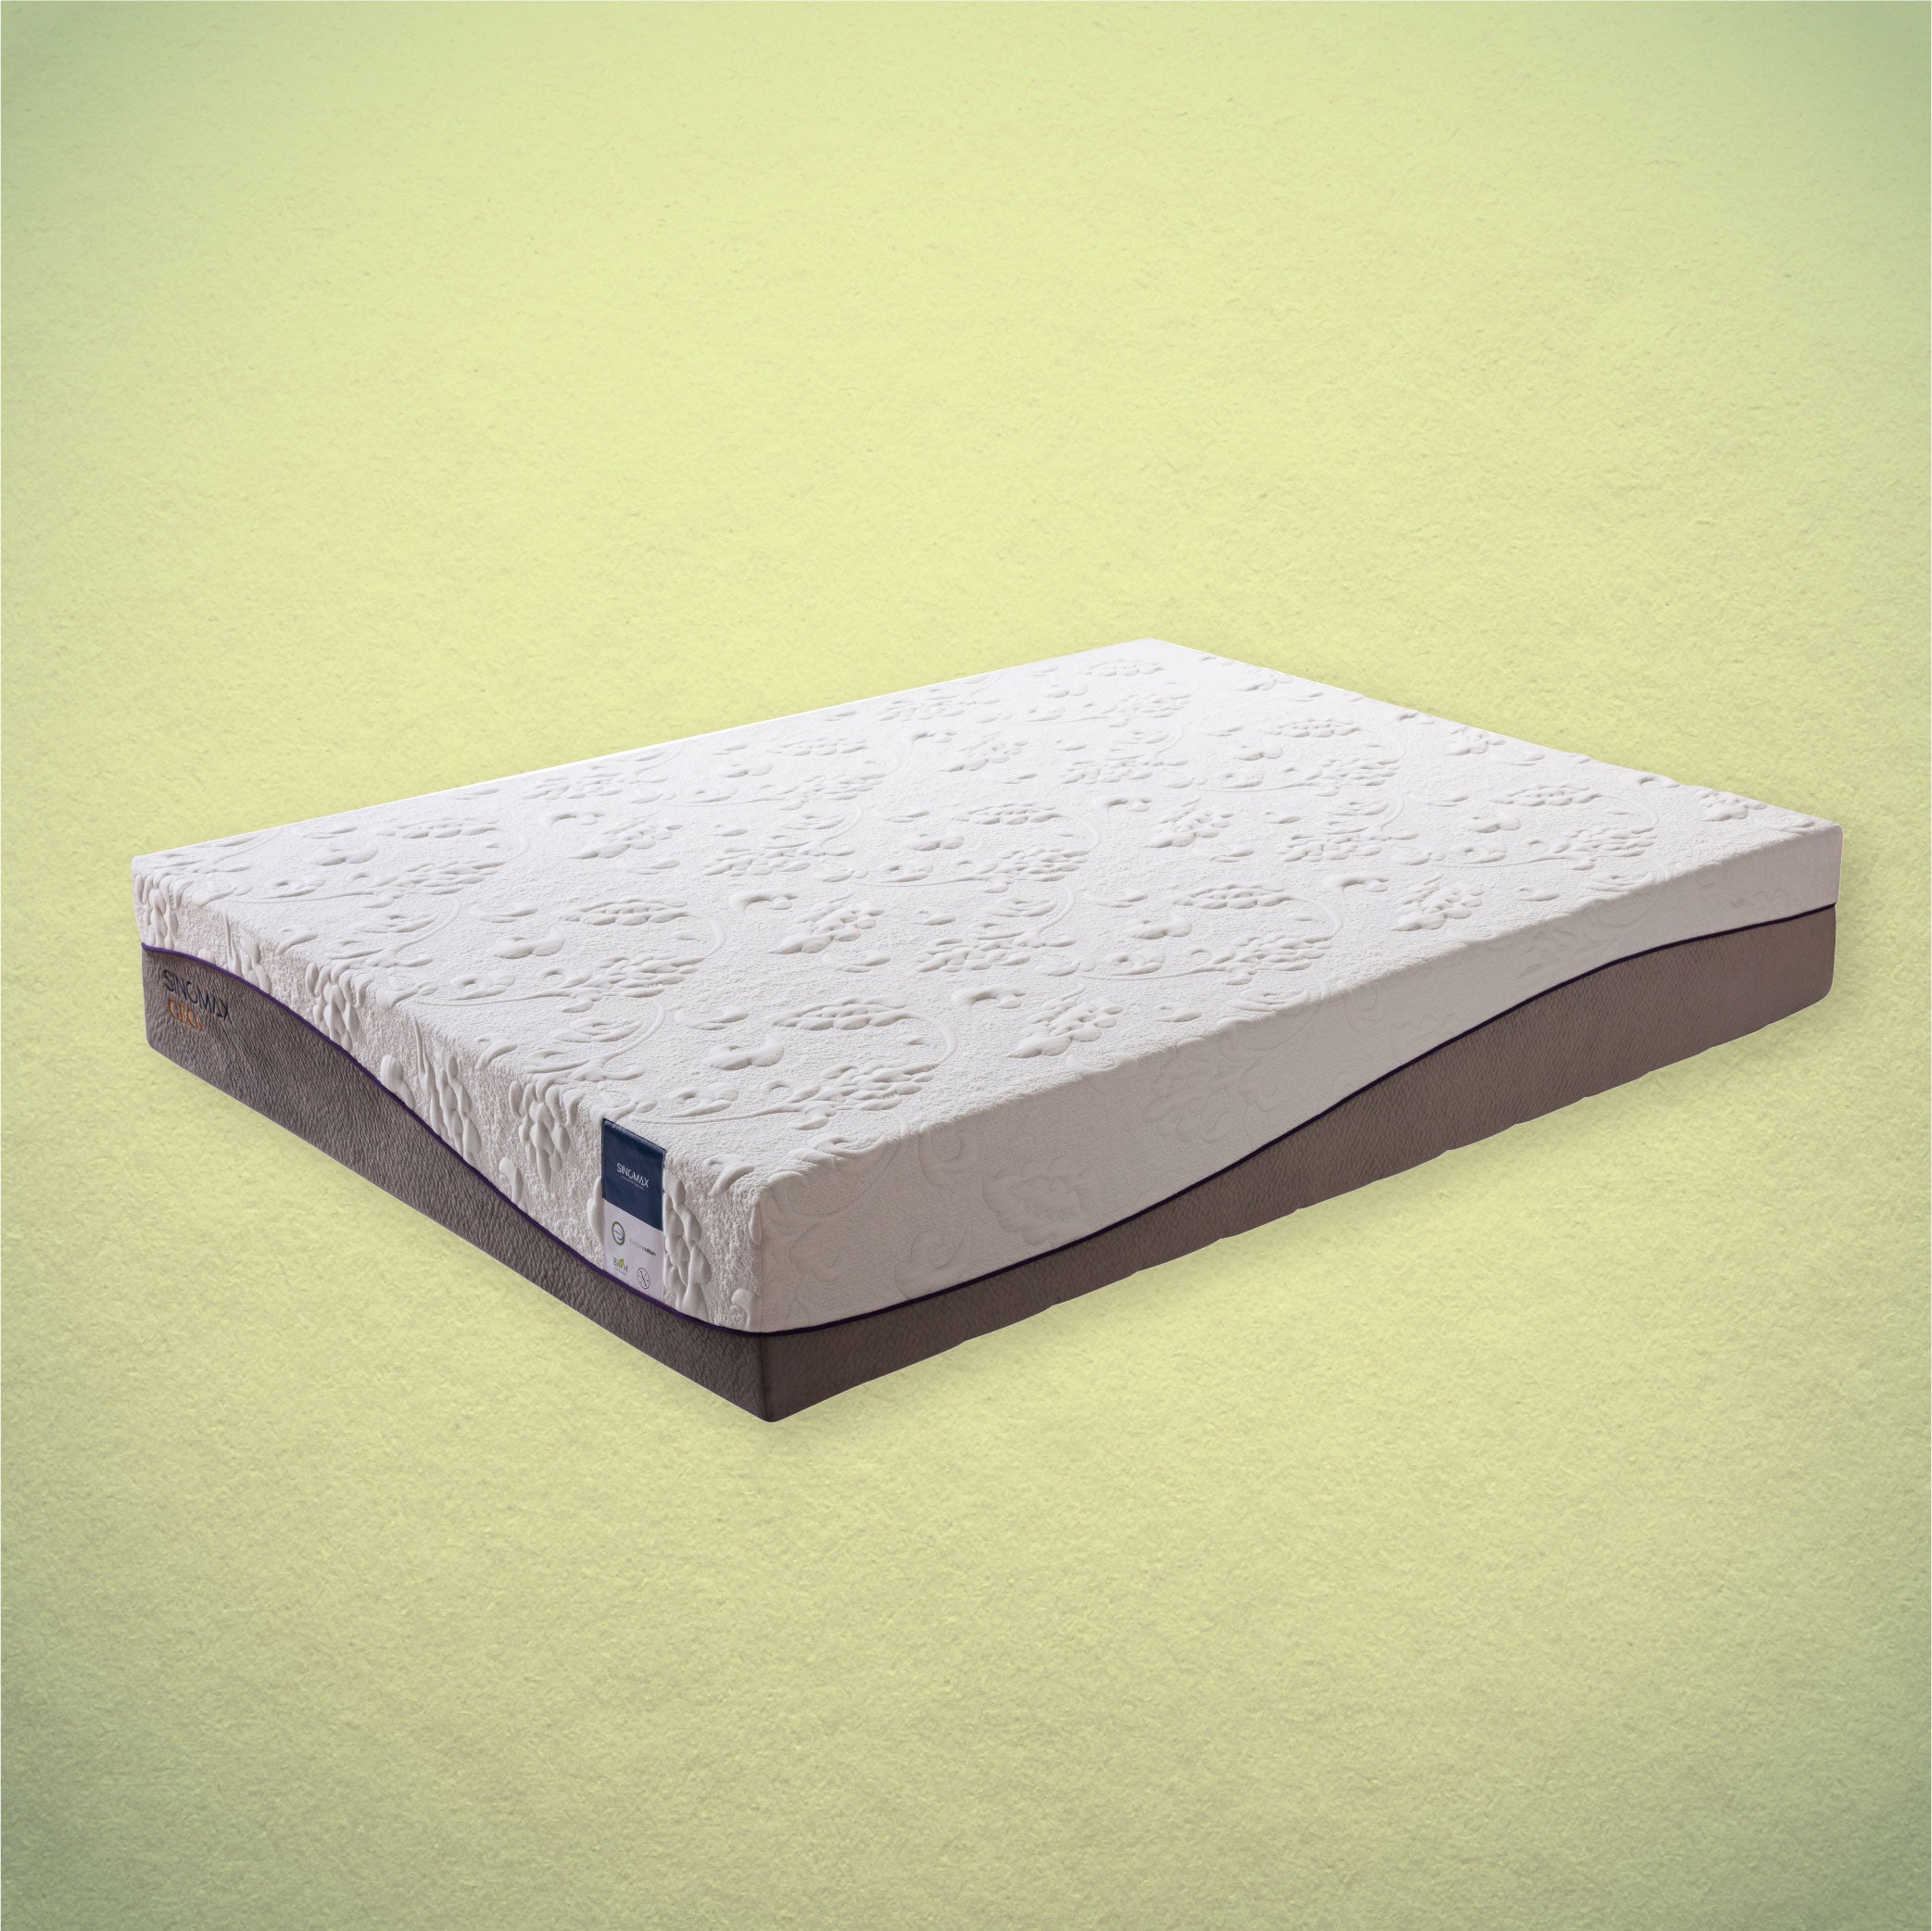 CEOx ULTRA Mattress - Tailor-made Size (Above 48"W) 